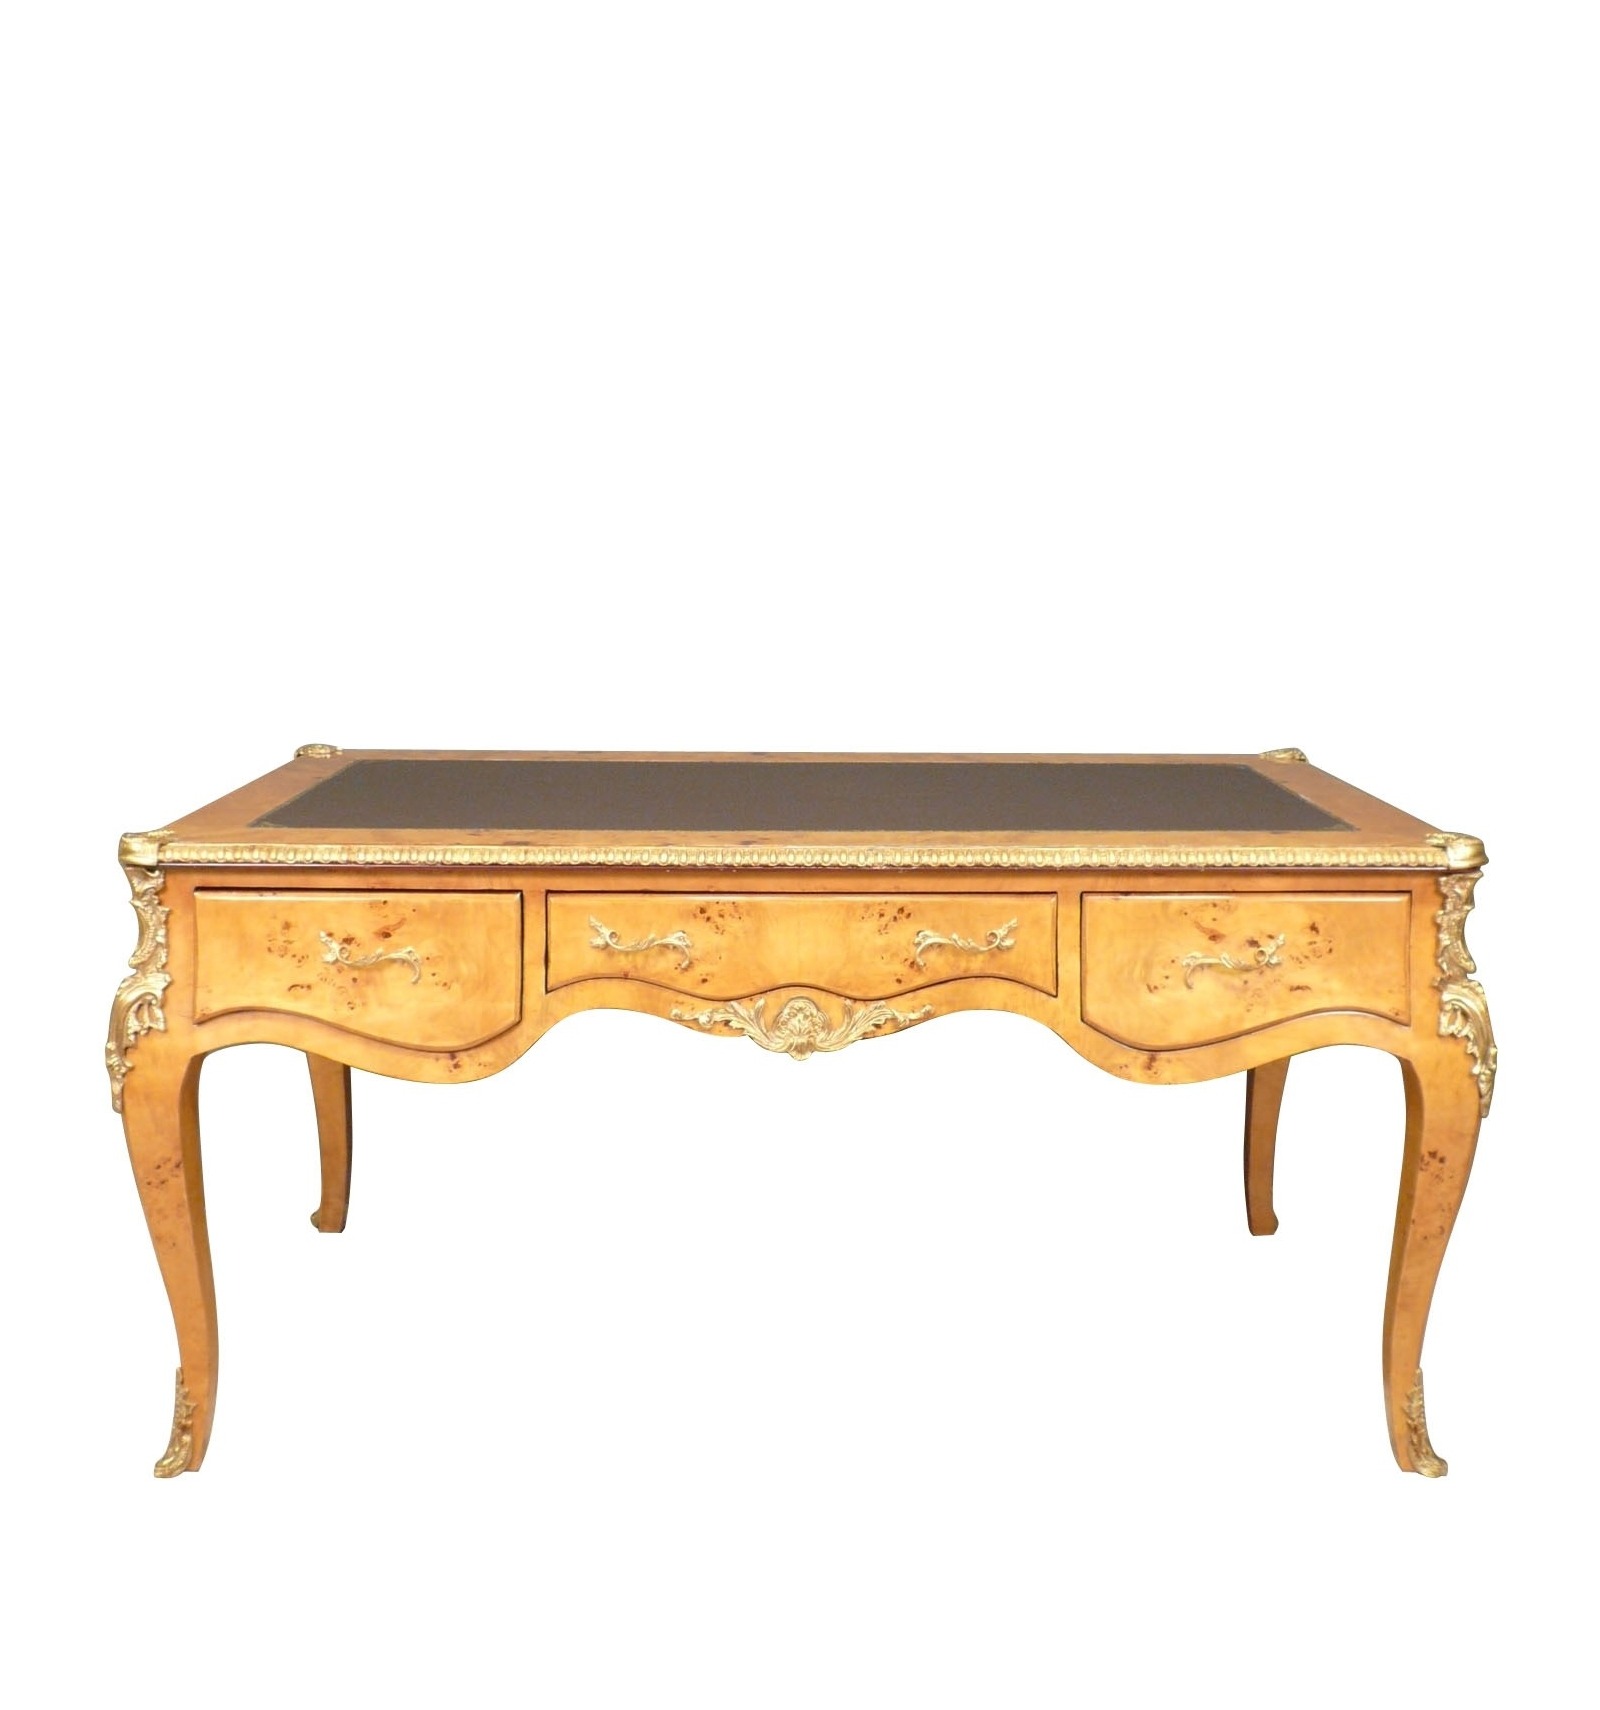 Louis XV style desk with 3 drawers with marquetry  Furniture styles,  Furniture, Antique reproduction furniture